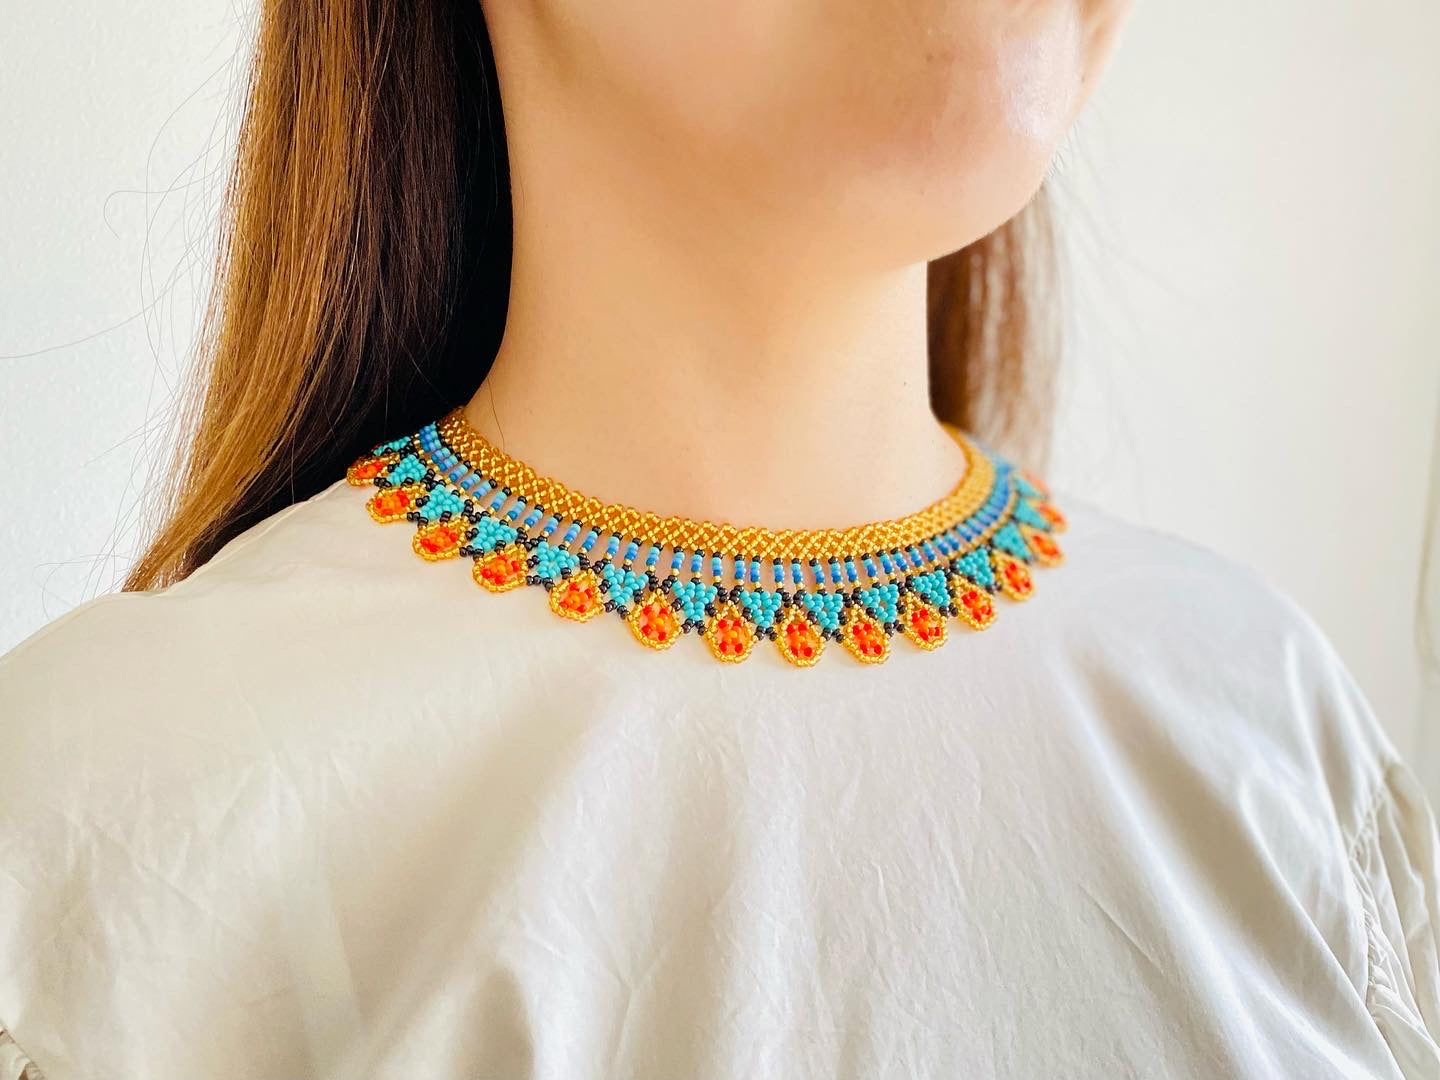 Enlace Beads Collar Necklace / Natale